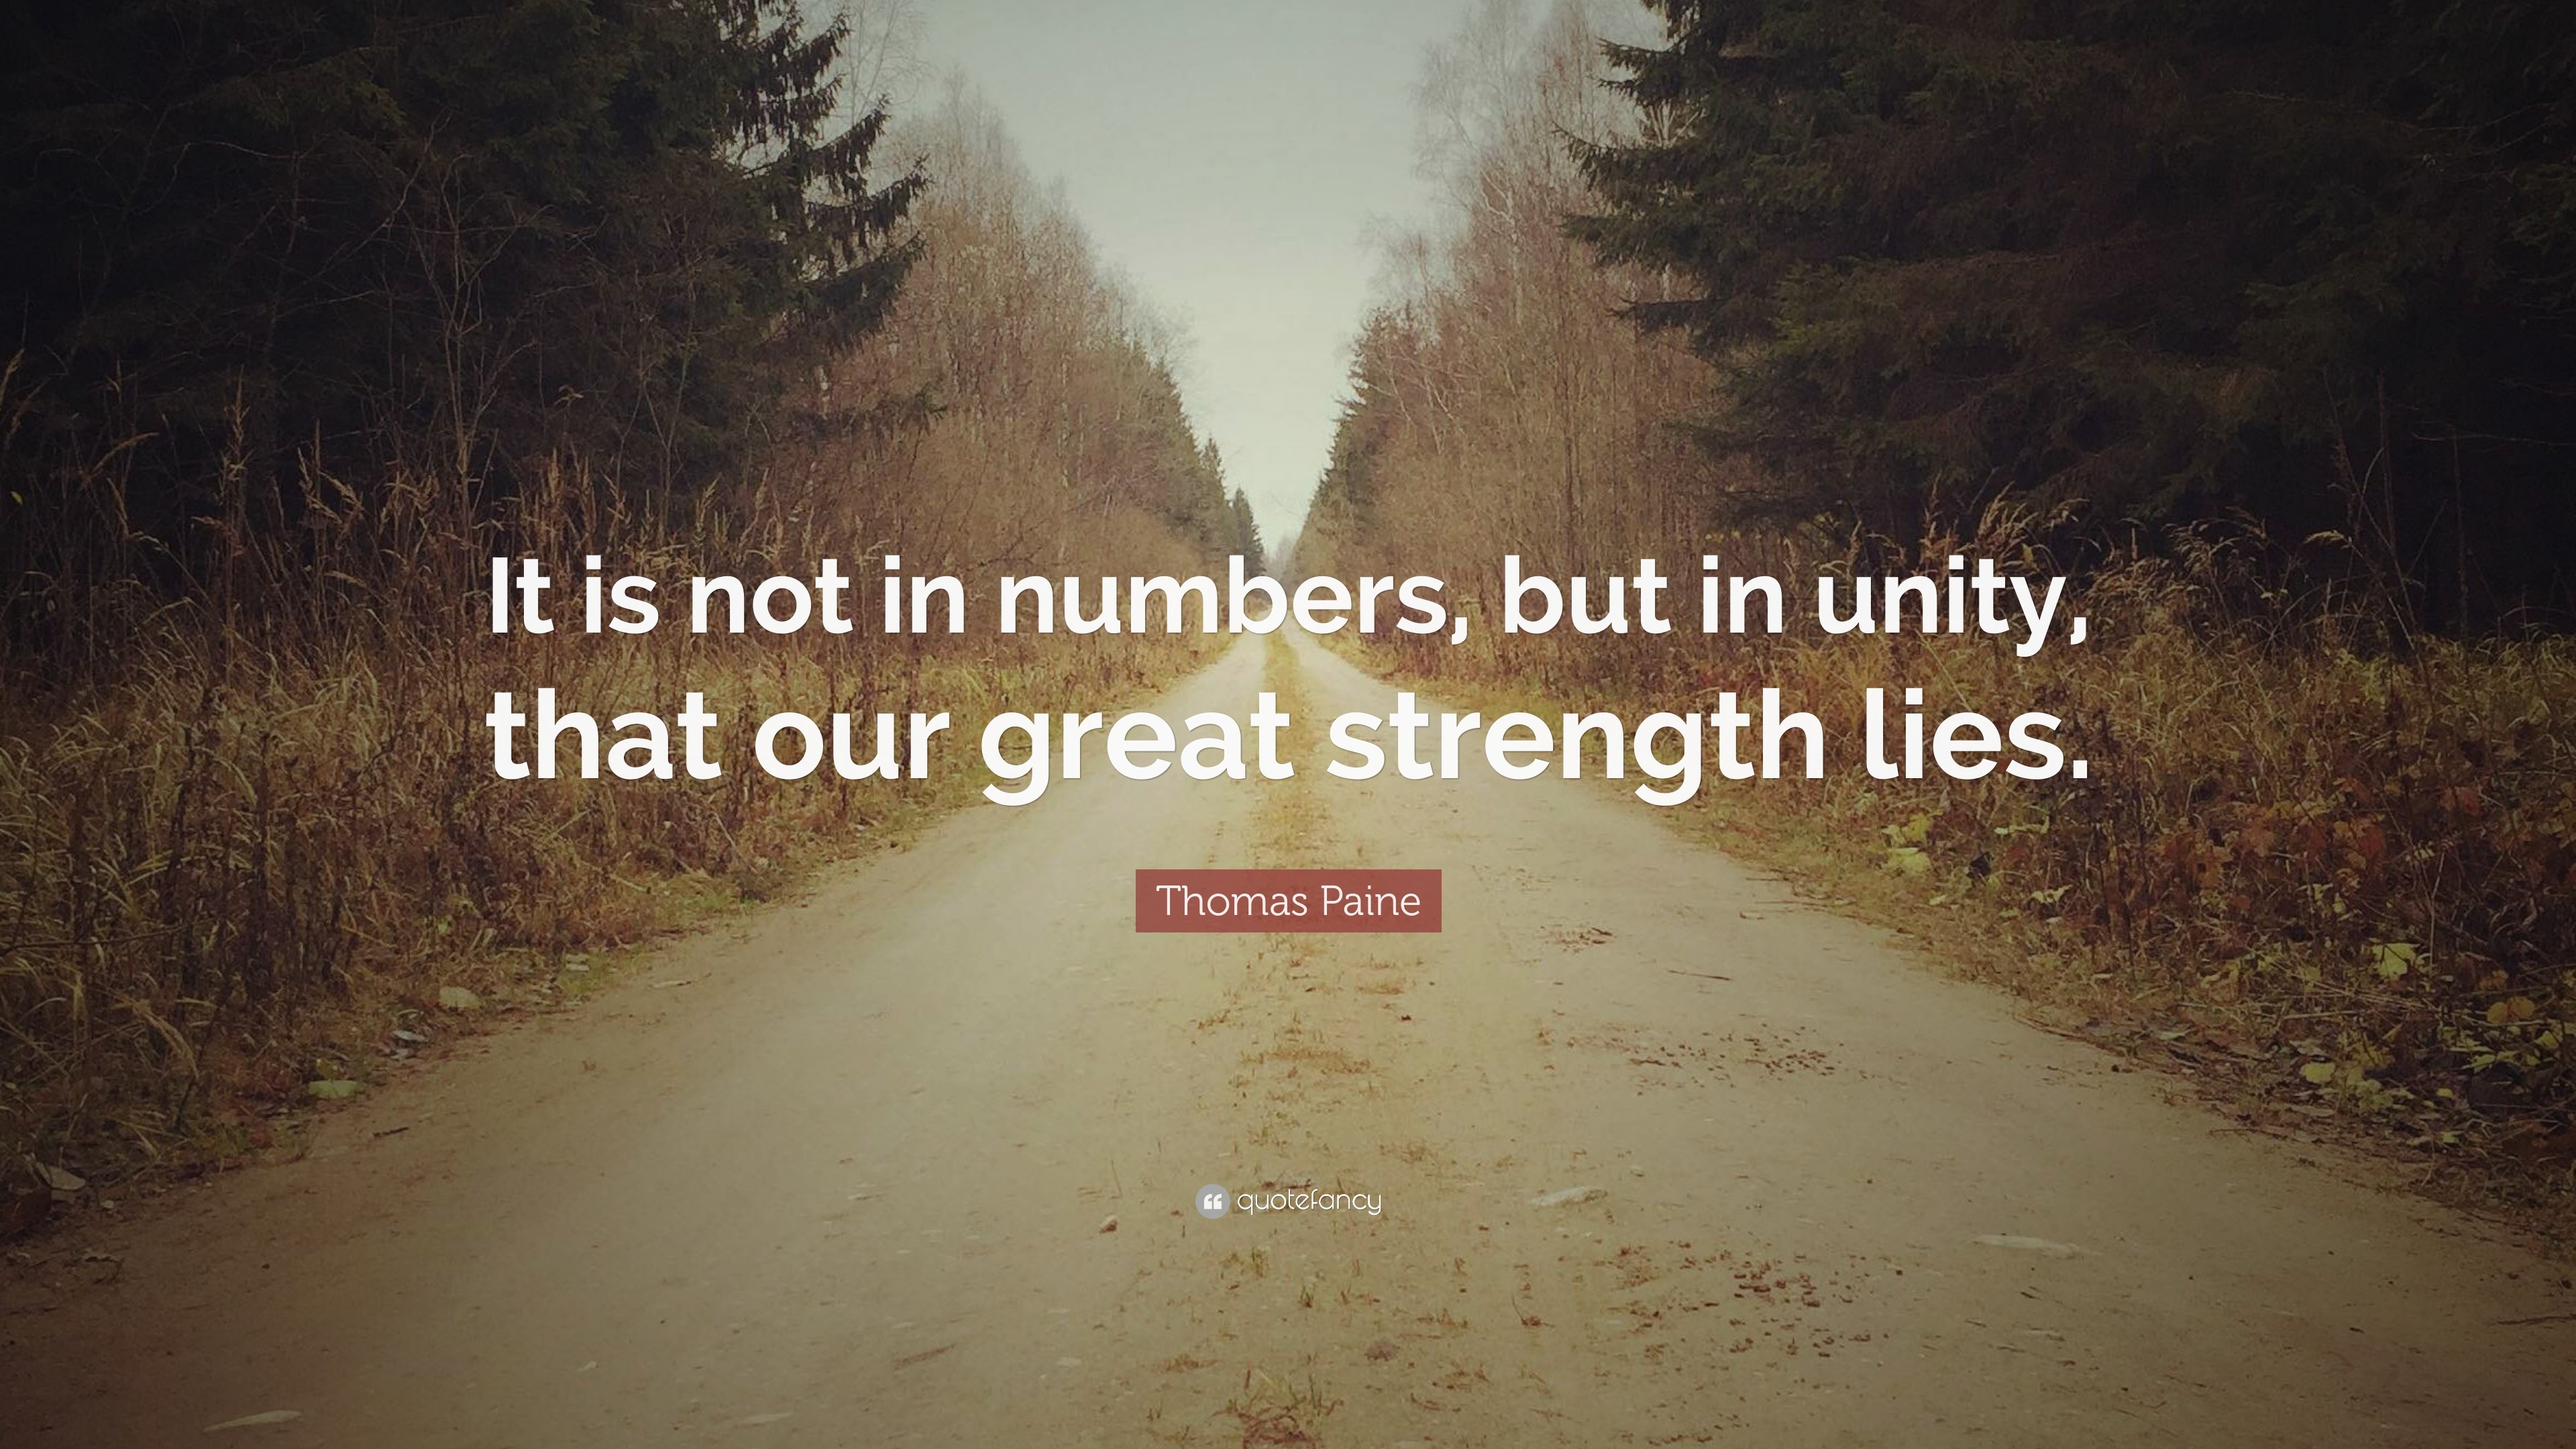 3840x2160 Thomas Paine Quote: “It is not in numbers, but in unity, that